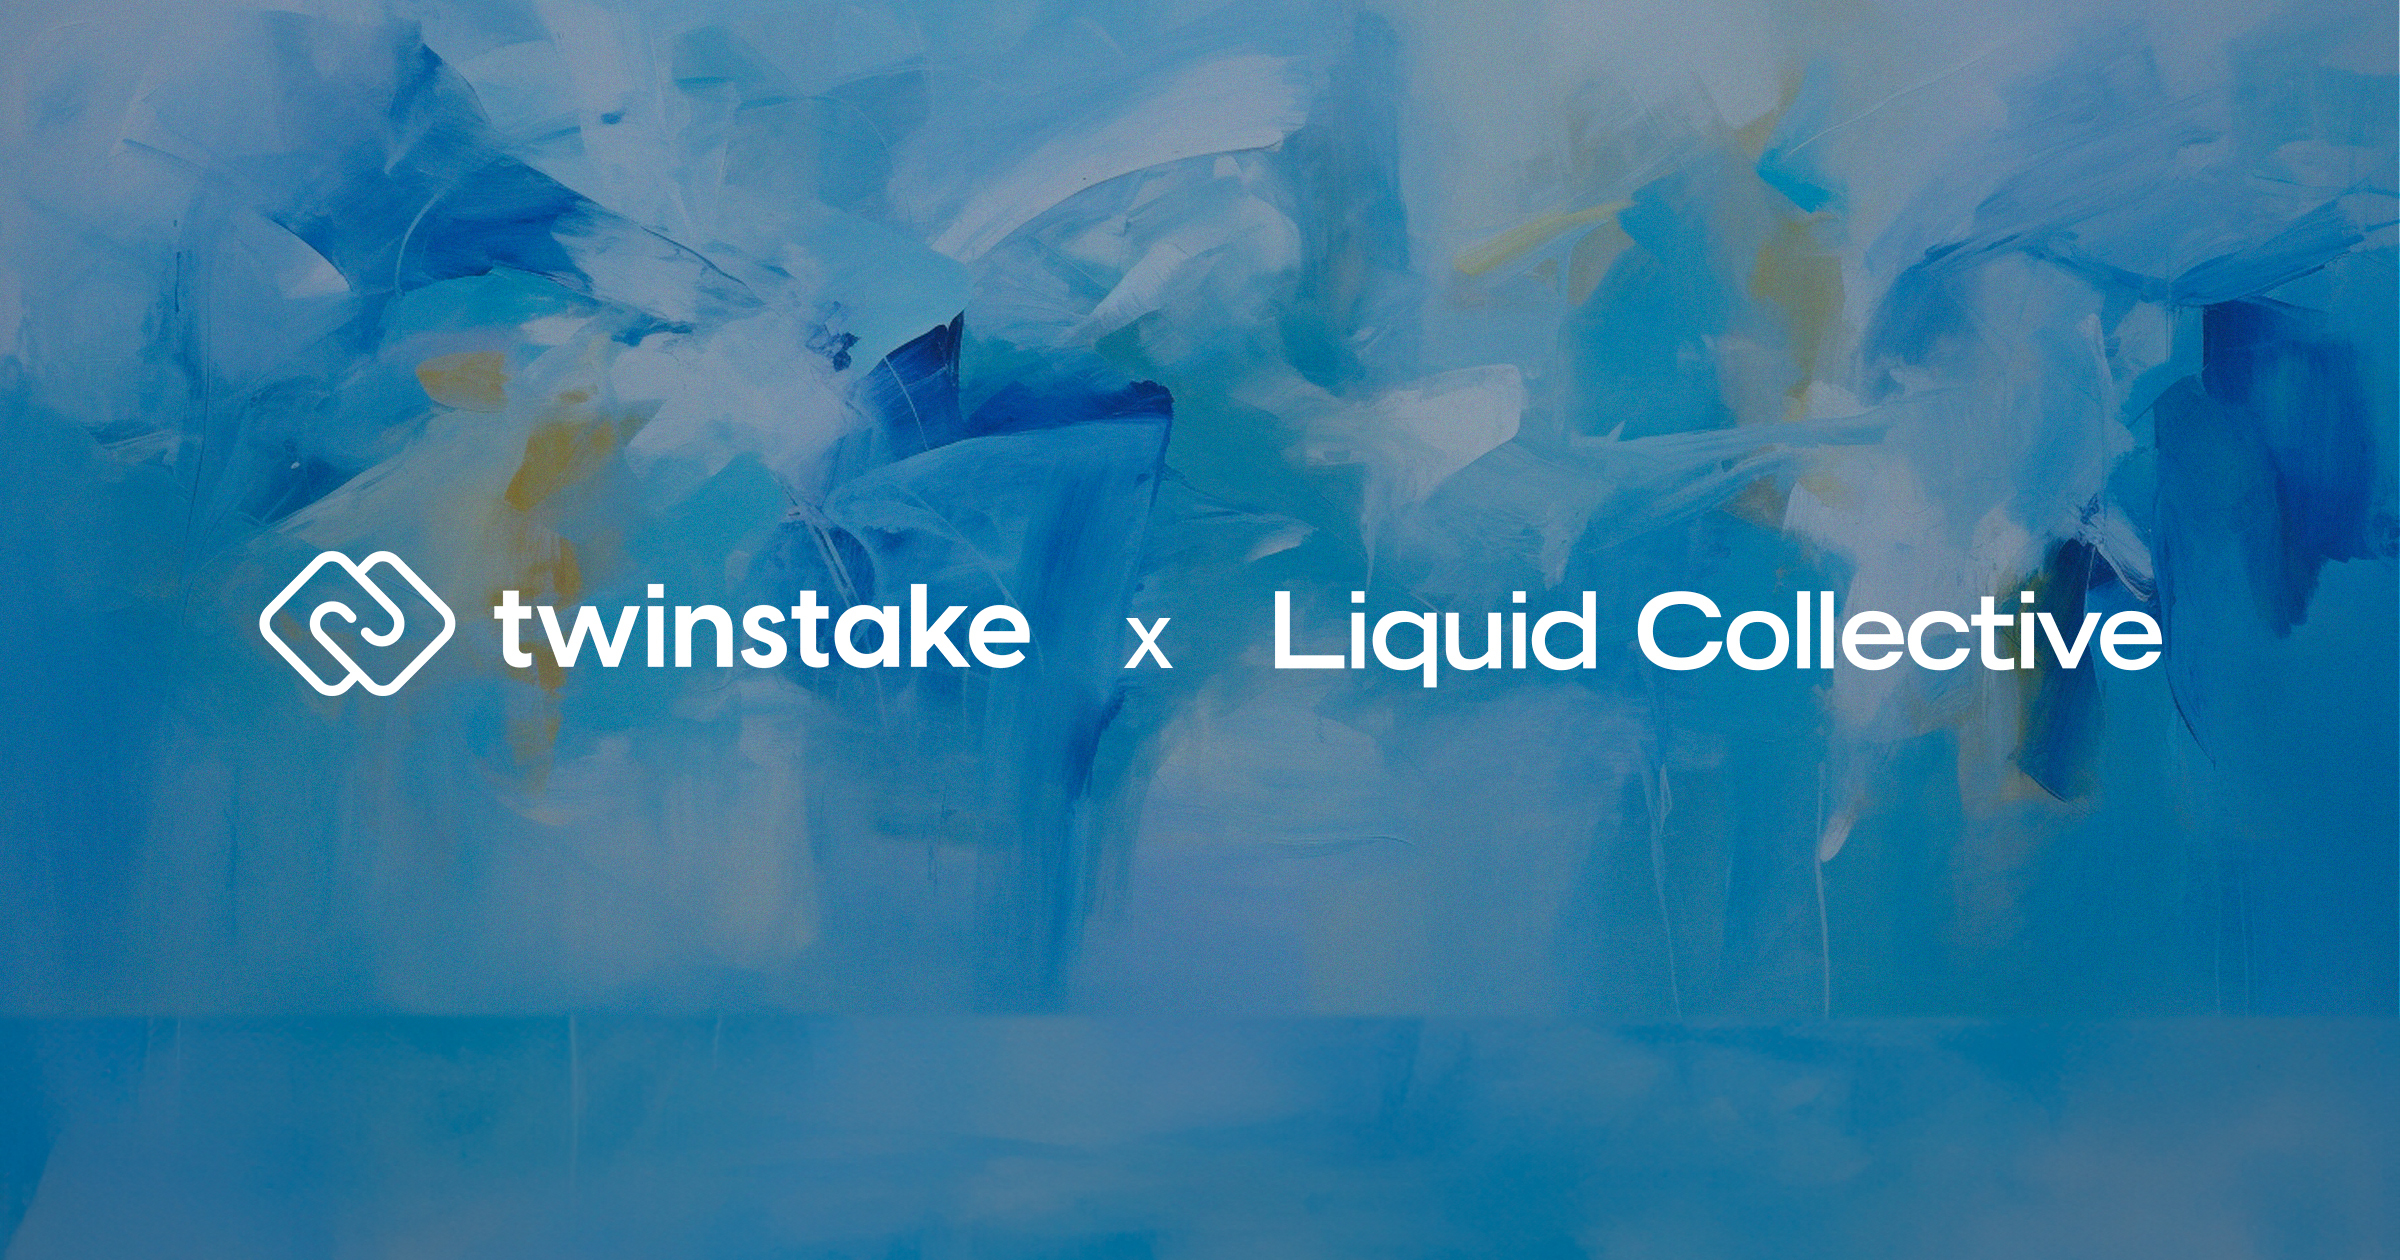 Twinstake joins Liquid Collective as Integrator to offer institutional liquid staking